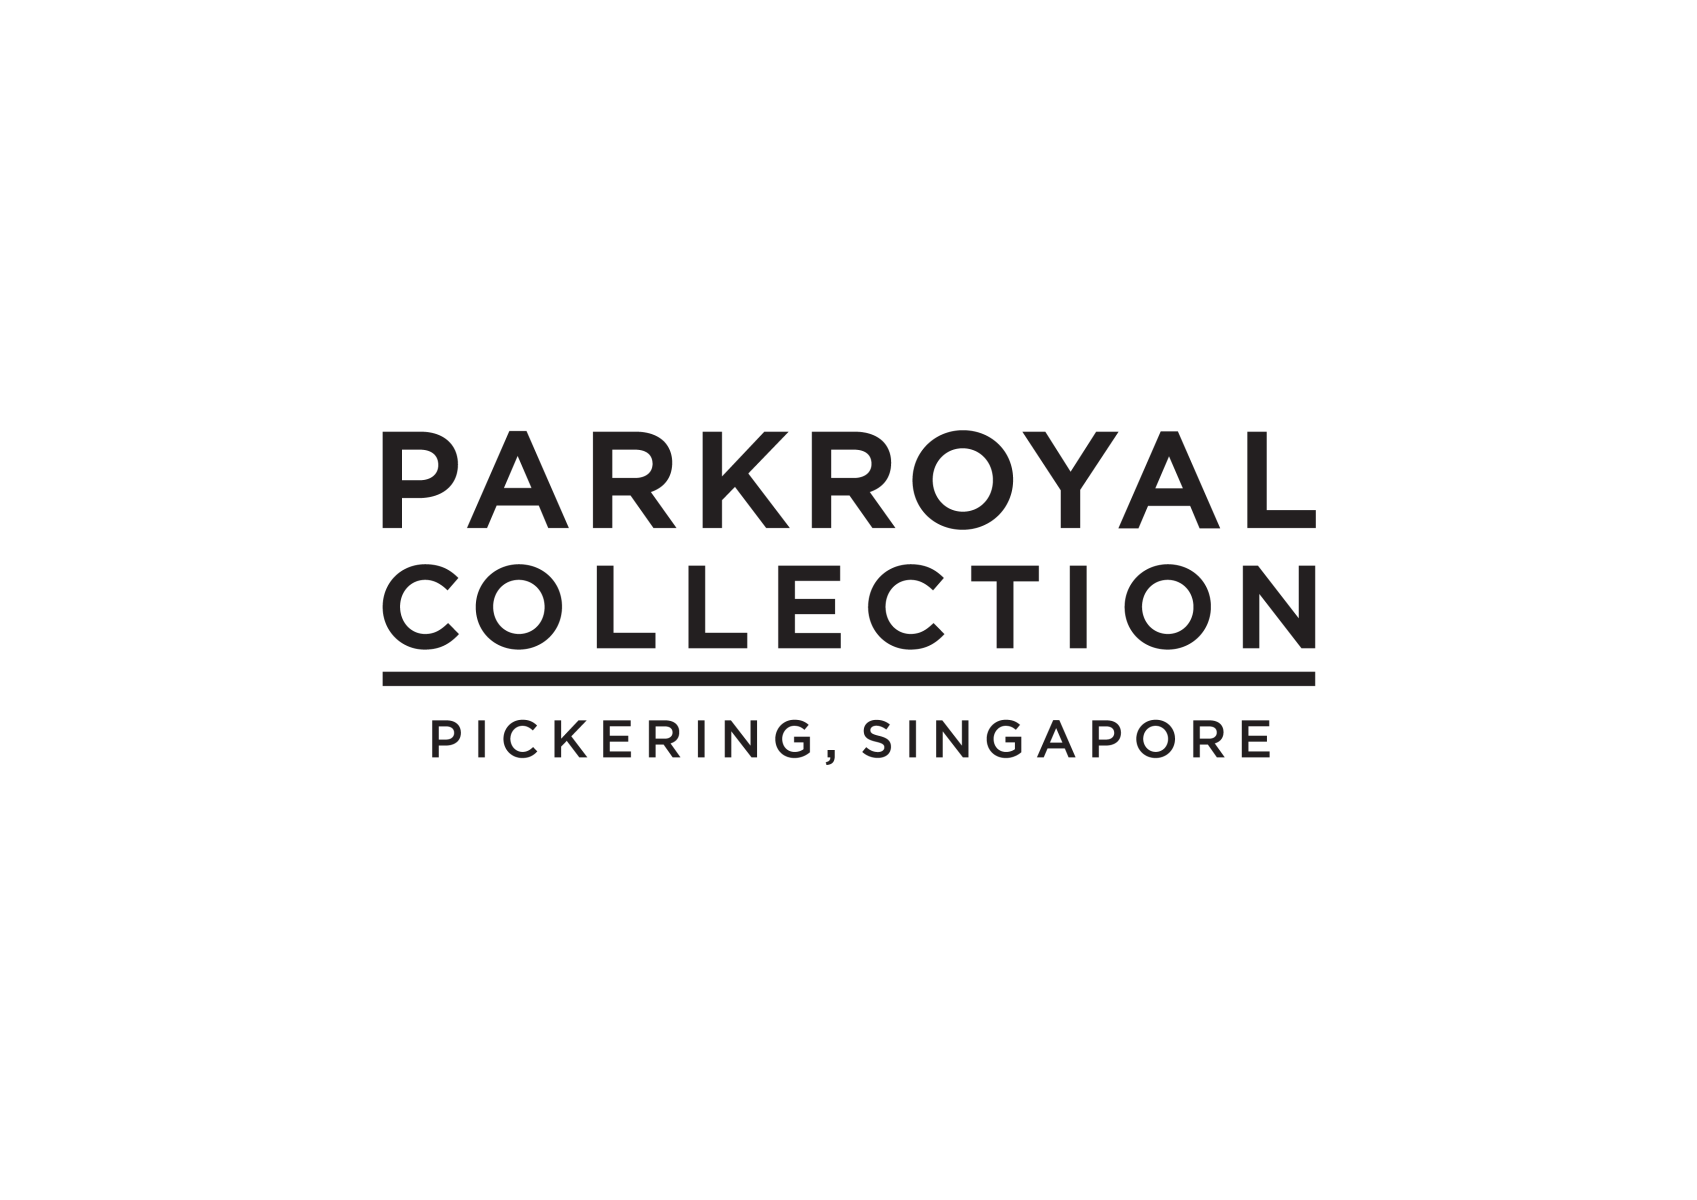 PARKROYAL COLLECTION Pickering, Singapore